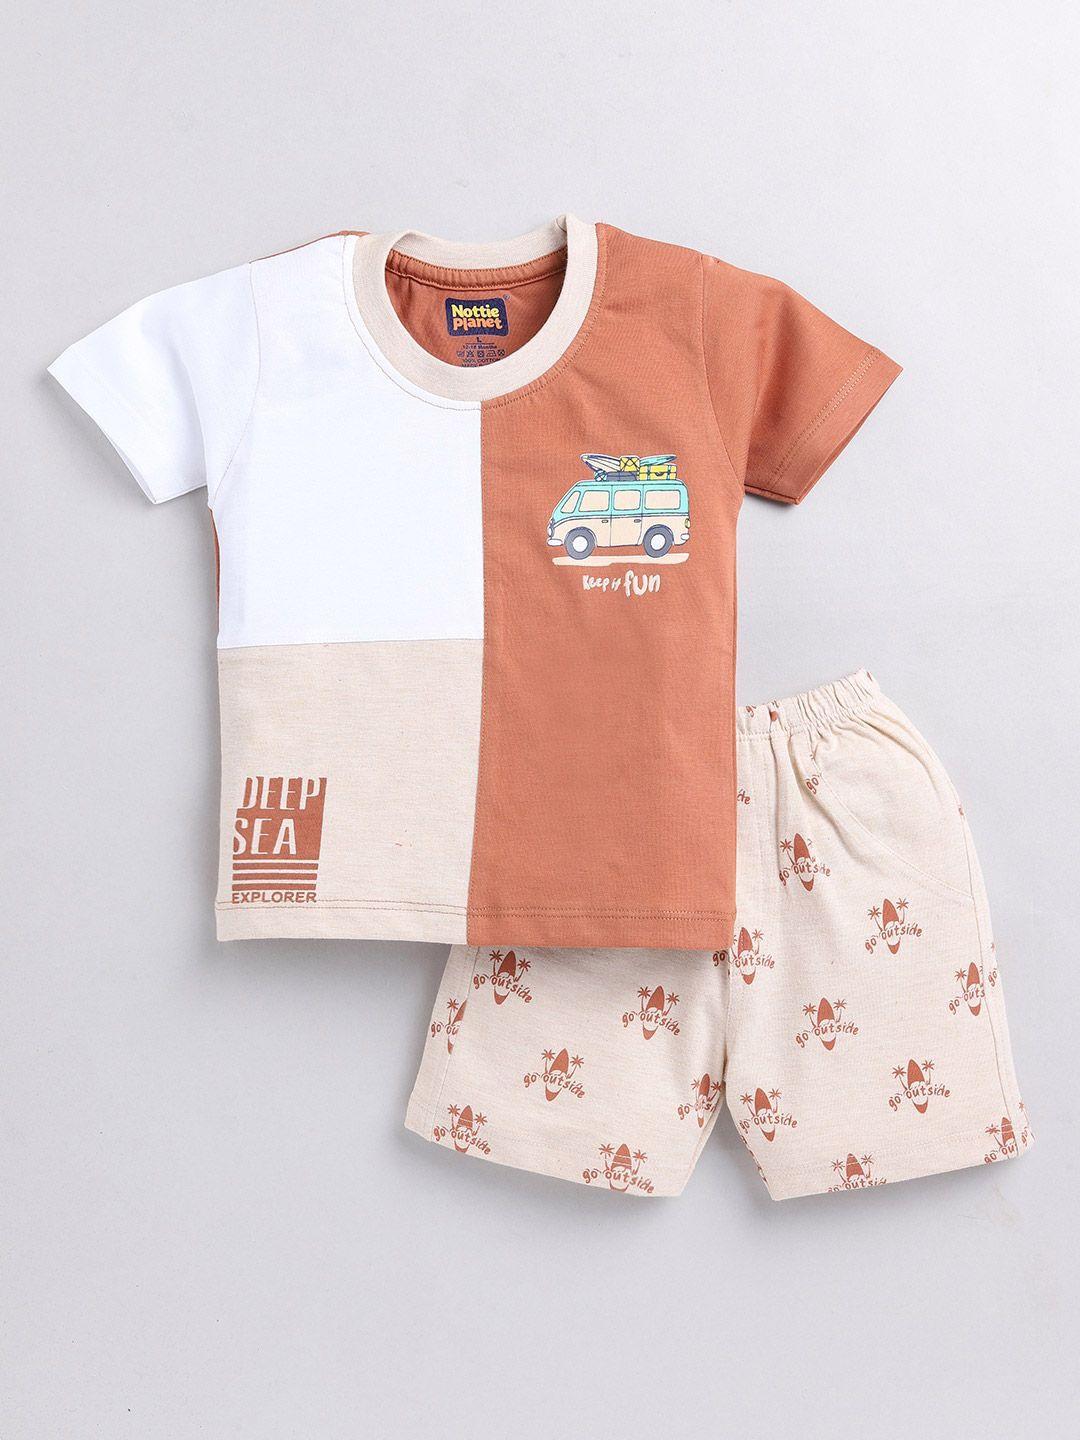 nottie planet boys printed pure cotton round neck t-shirt with shorts